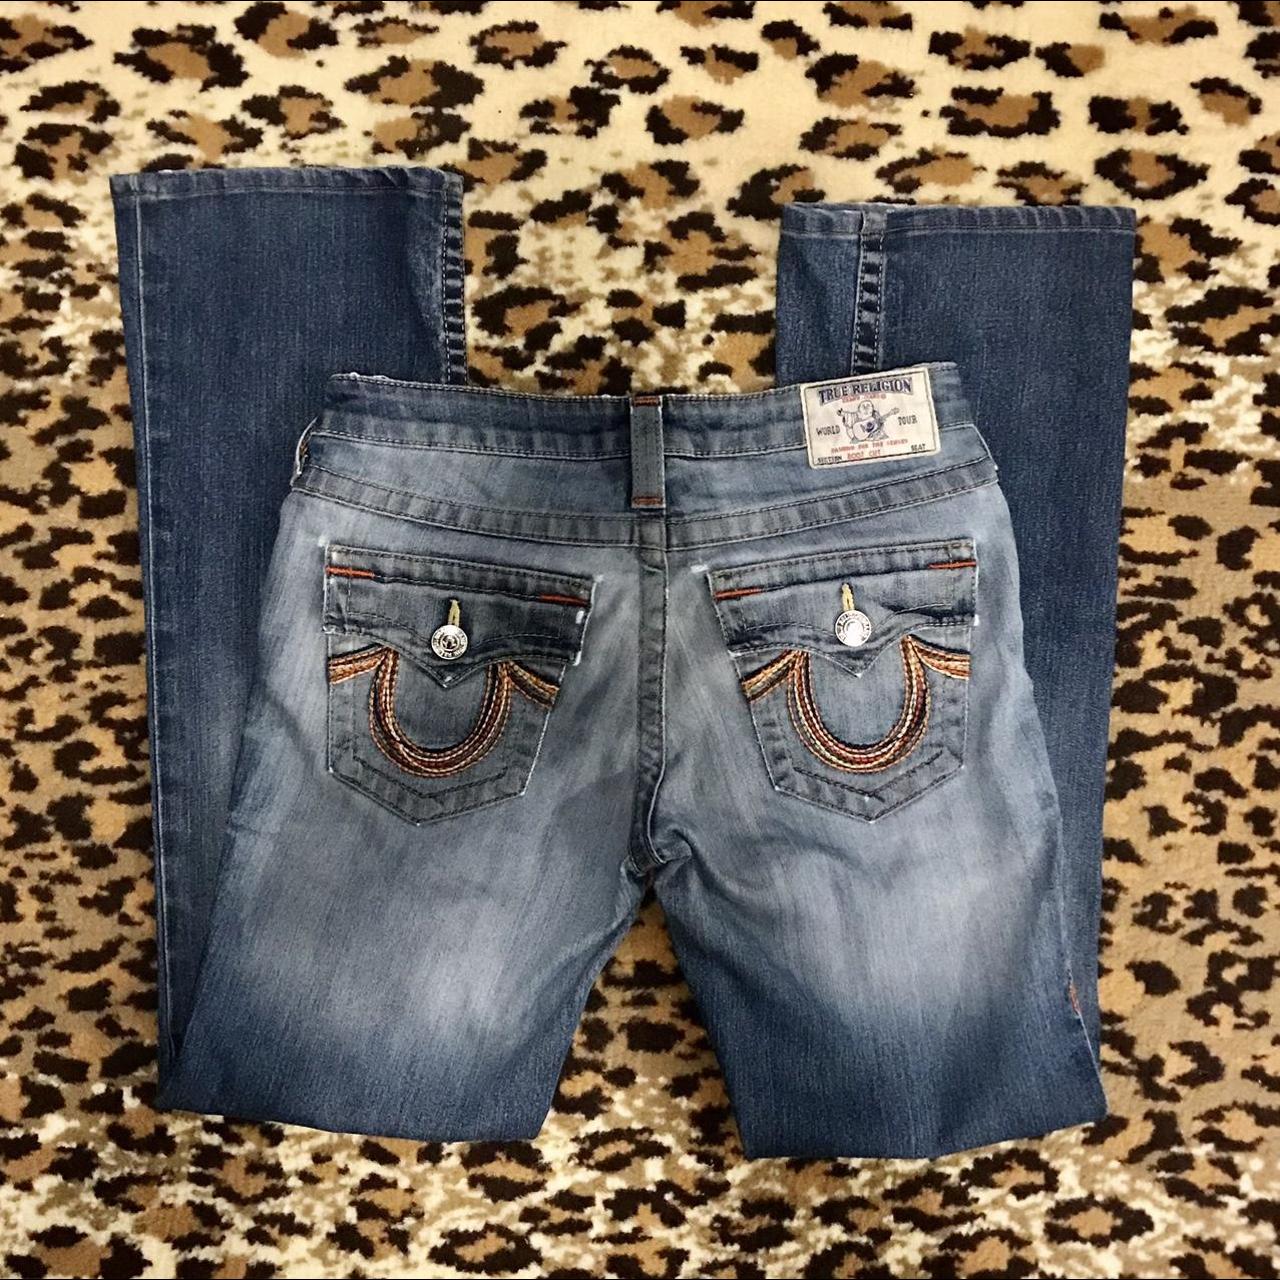 True Religion rainbow jeans size 26 with 29 and a... - Depop